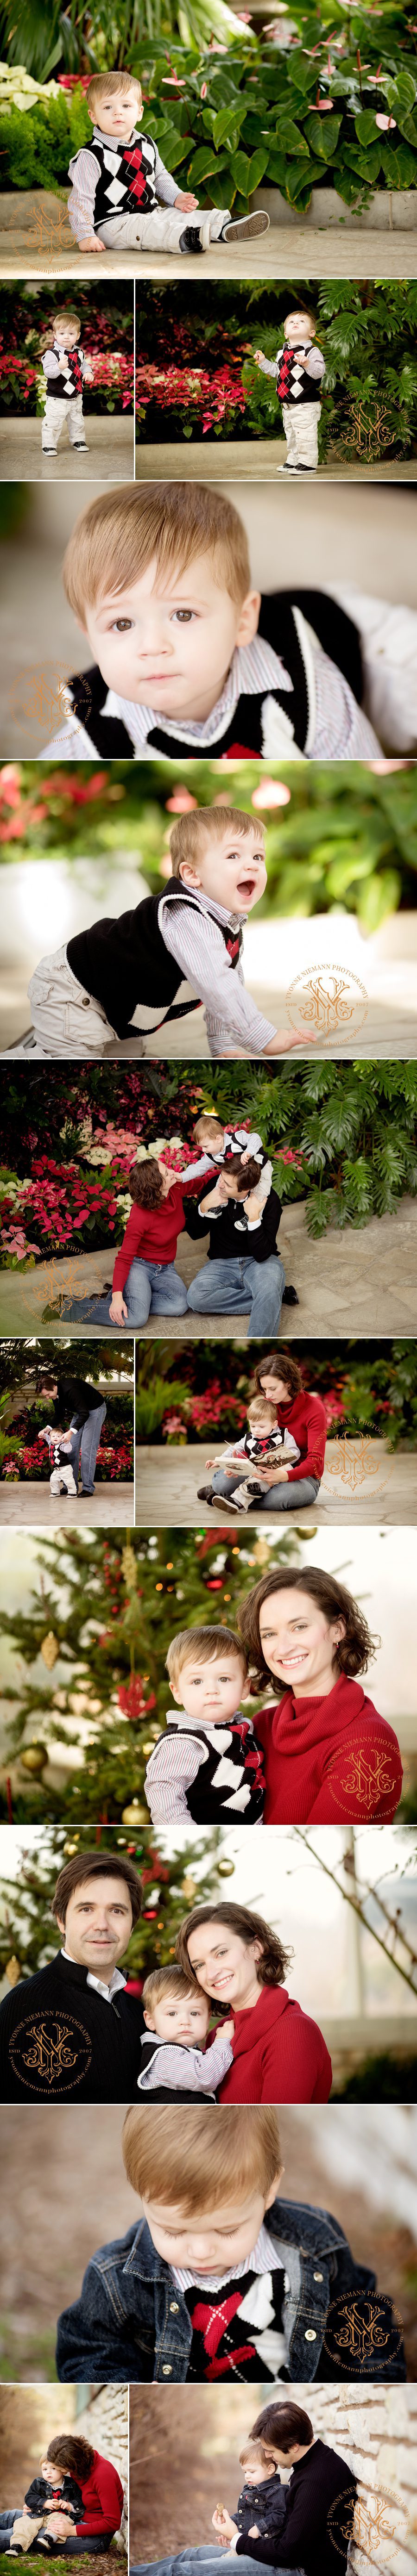 Natural family portraits taken at St. Louis Jewel Box by Yvonne Niemann Photography.